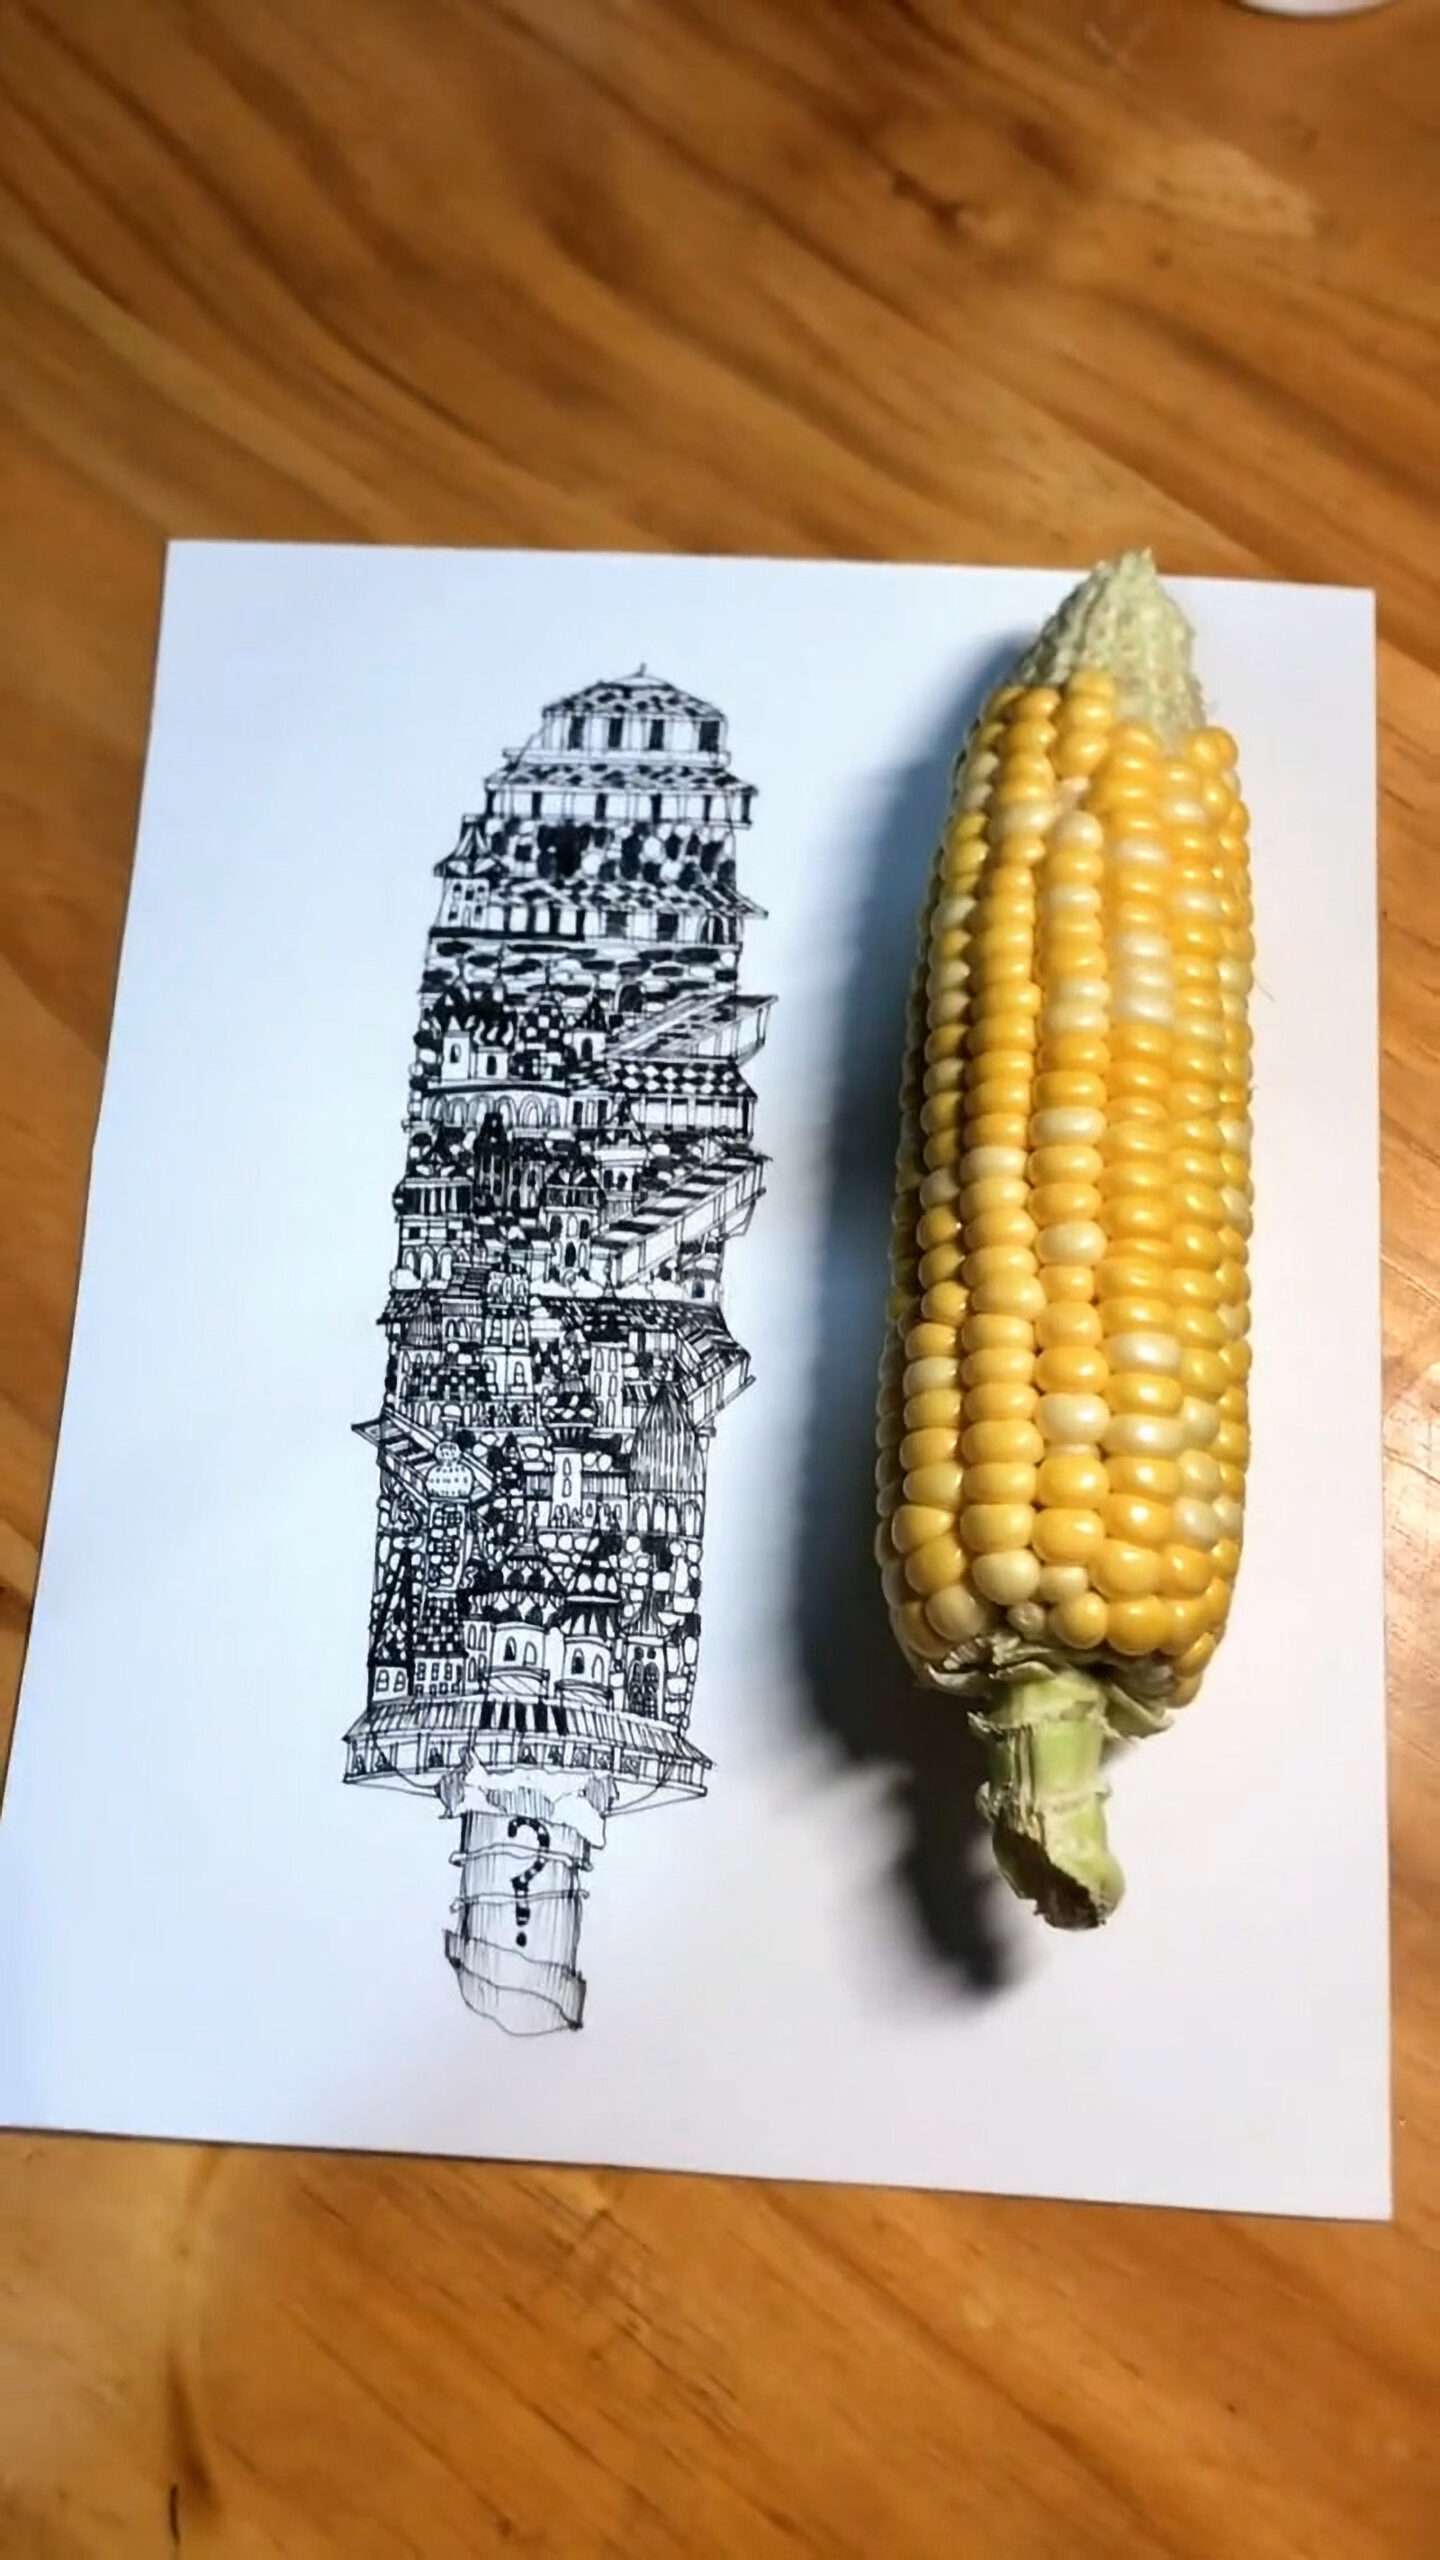 Read more about the article GREEN FINGERS: Boy’s Astonishing Architectural Drawings Based On Vegetable Outlines